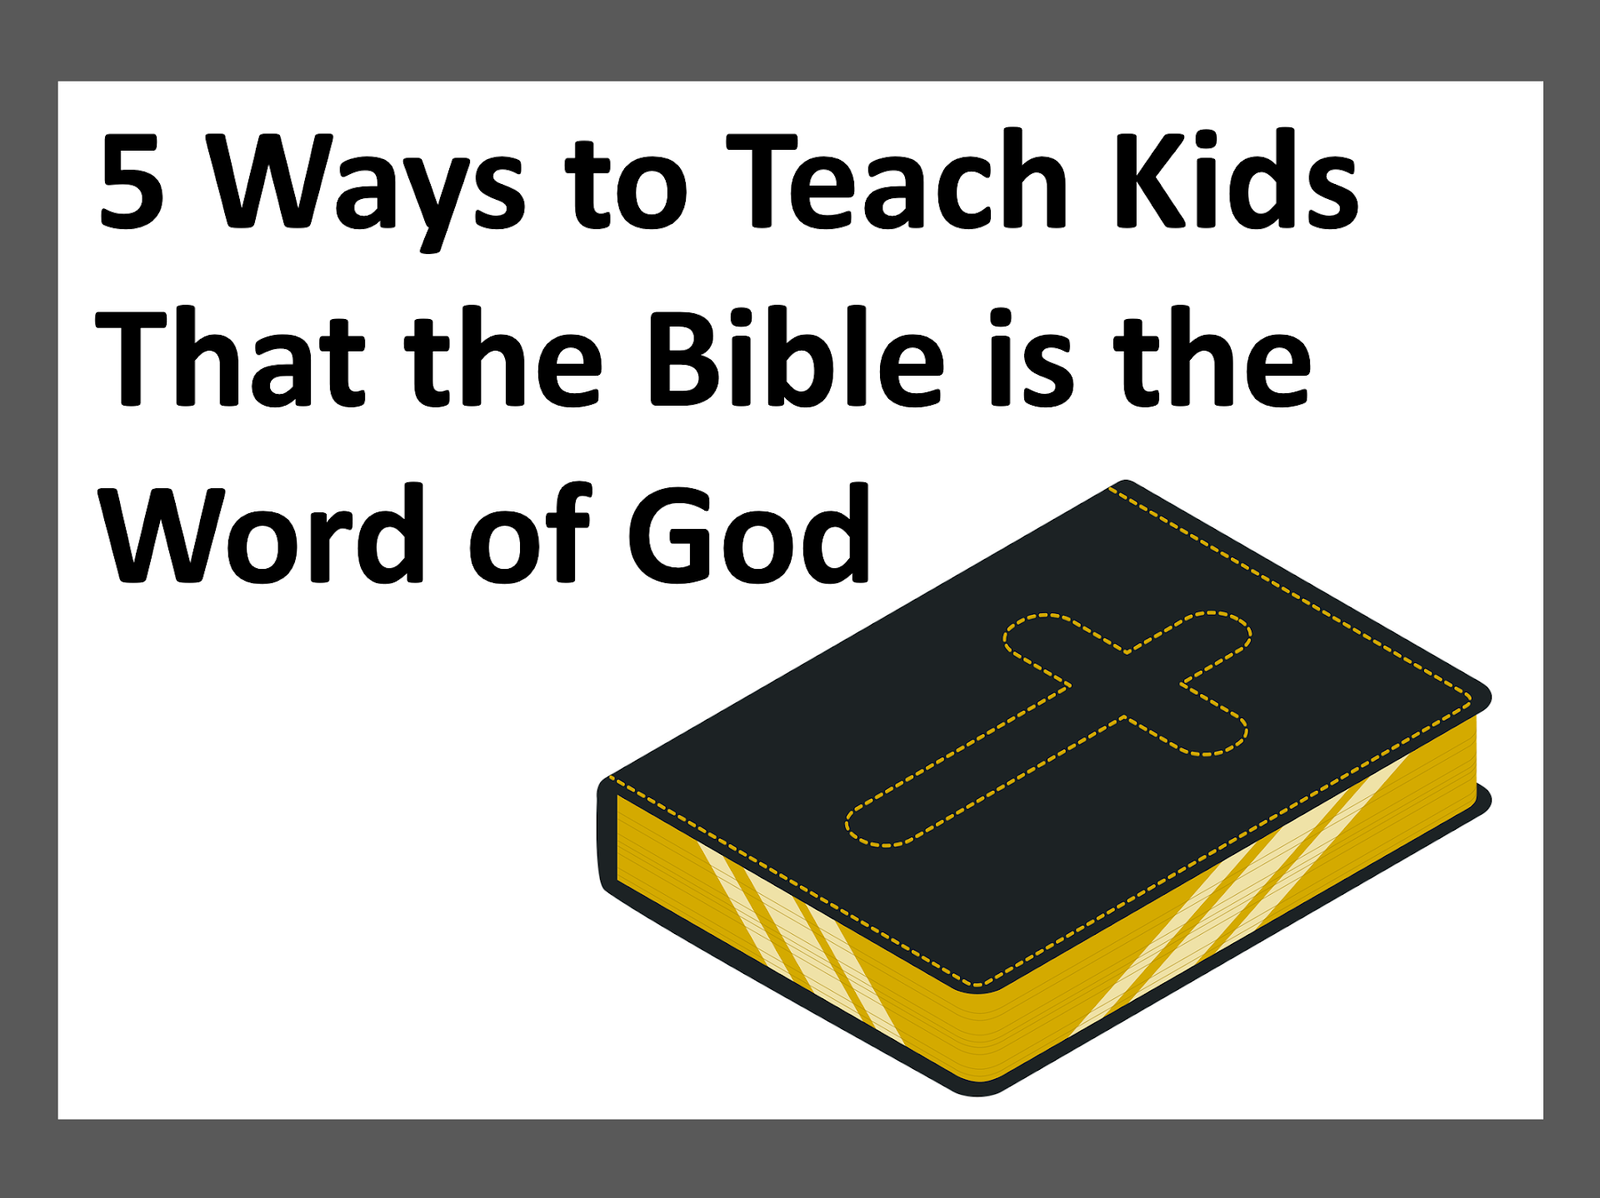 5-ways-to-teach-kids-that-the-bible-is-the-word-of-god-relevant